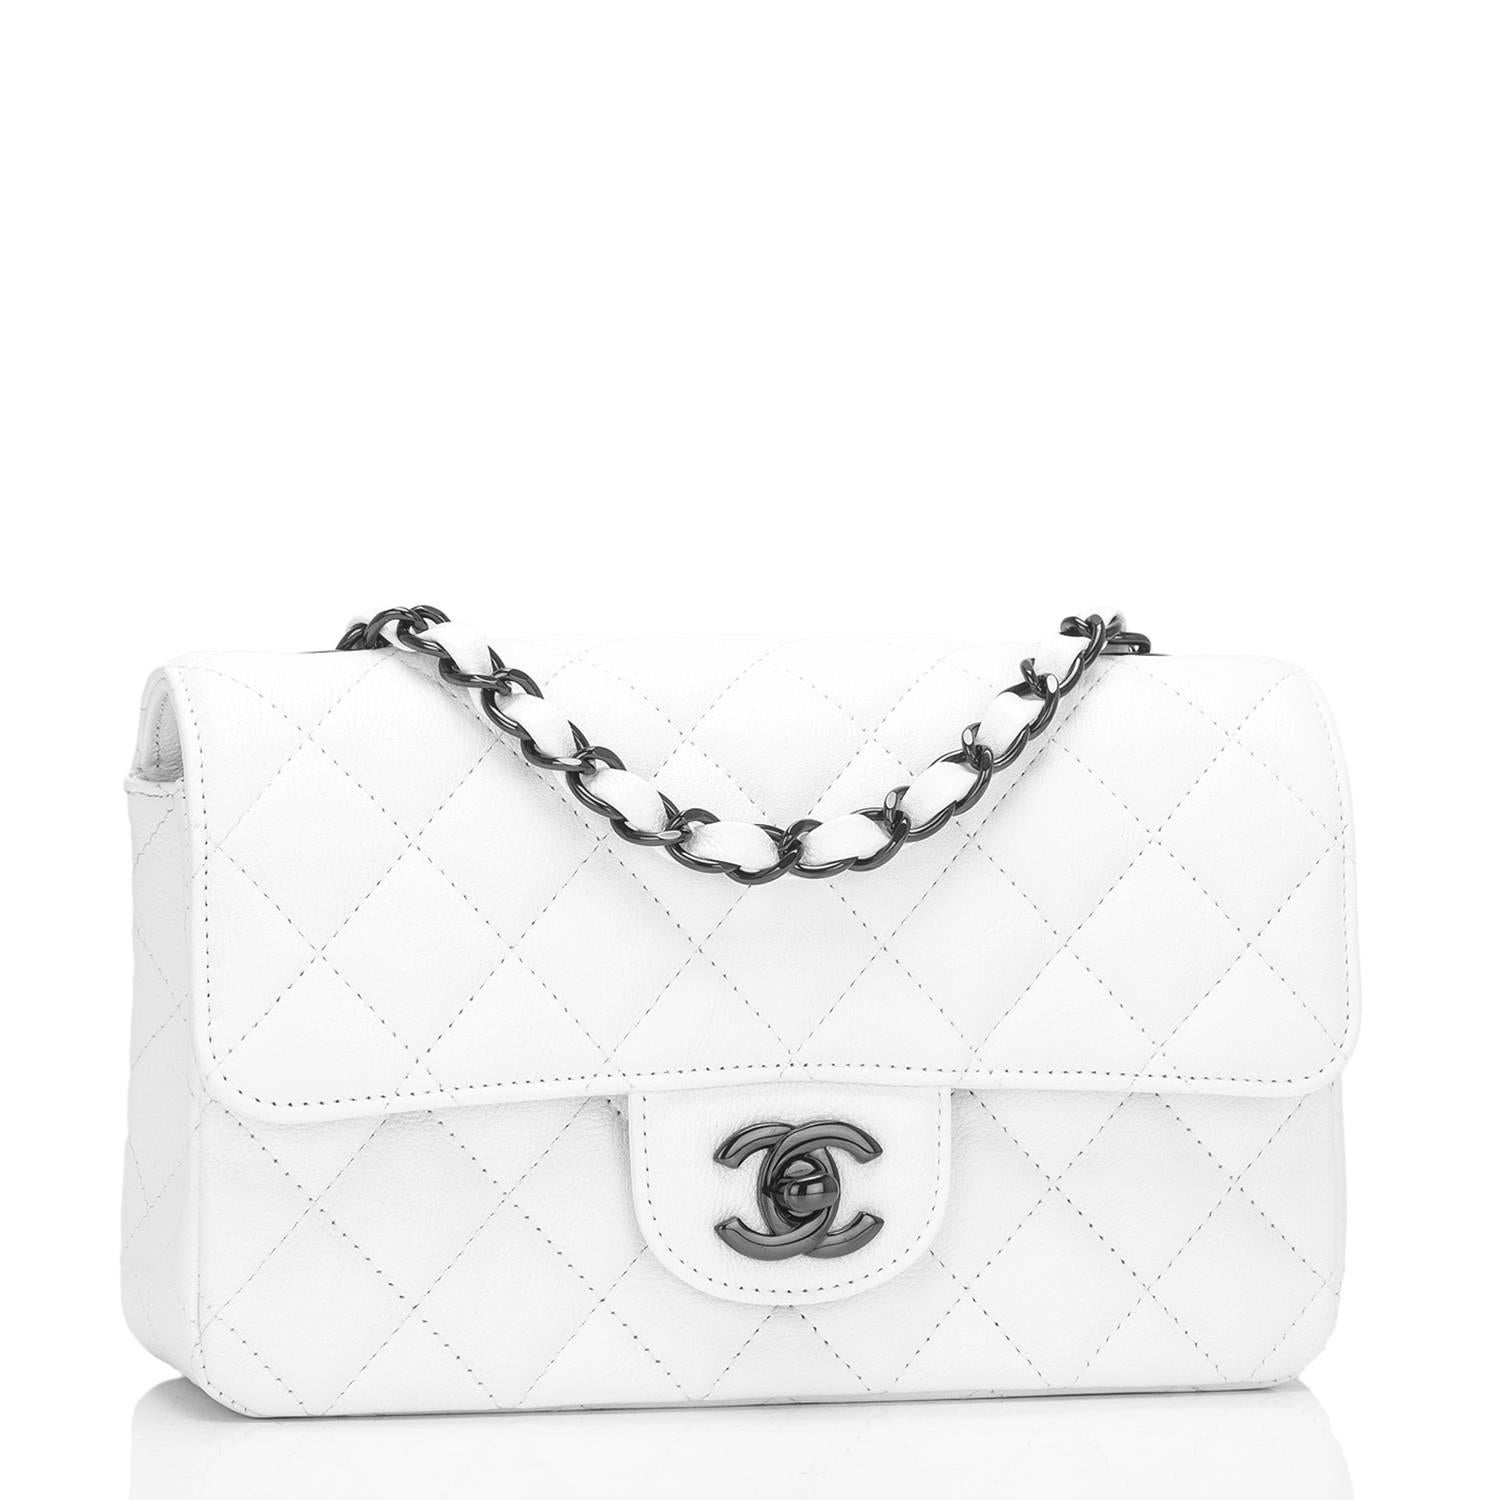 Chanel Rectangular Mini Classic flap bag of white crumpled calfskin leather with black hardware.

This limited edition bag has a front flap with signature CC turnlock closure, rear half moon pocket and single interwoven white leather and black chain